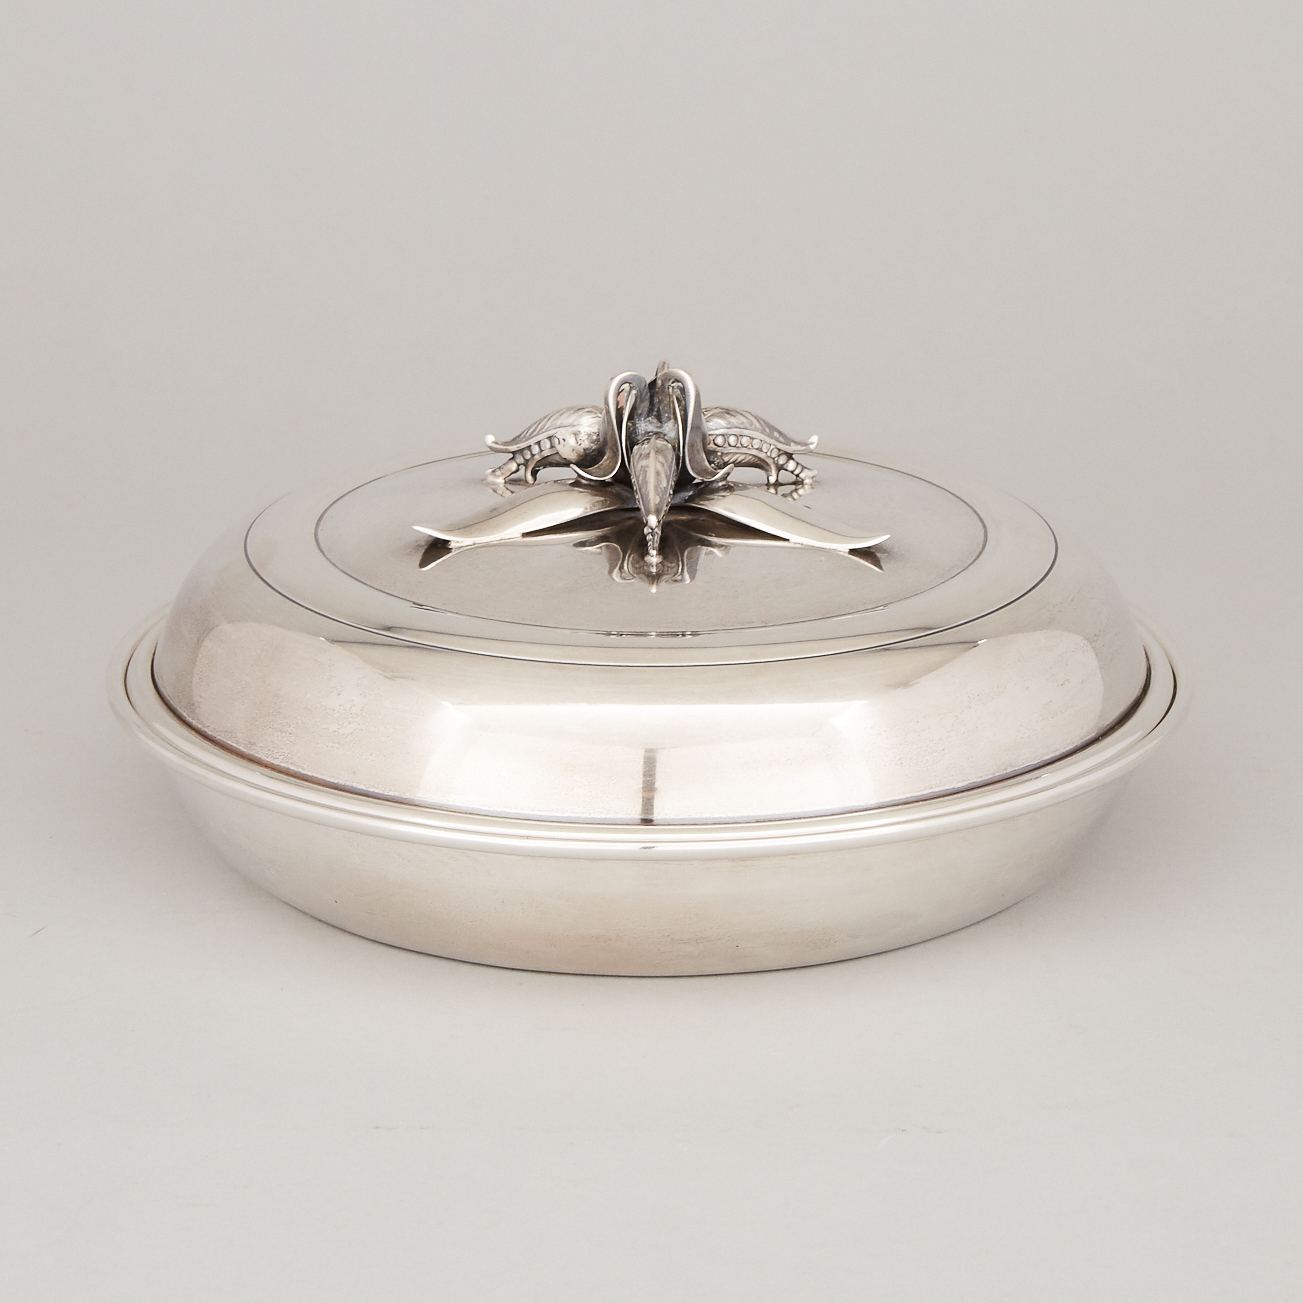 Canadian Silver Covered Serving Dish, Carl Poul Petersen, Montreal, Que., mid-20th century